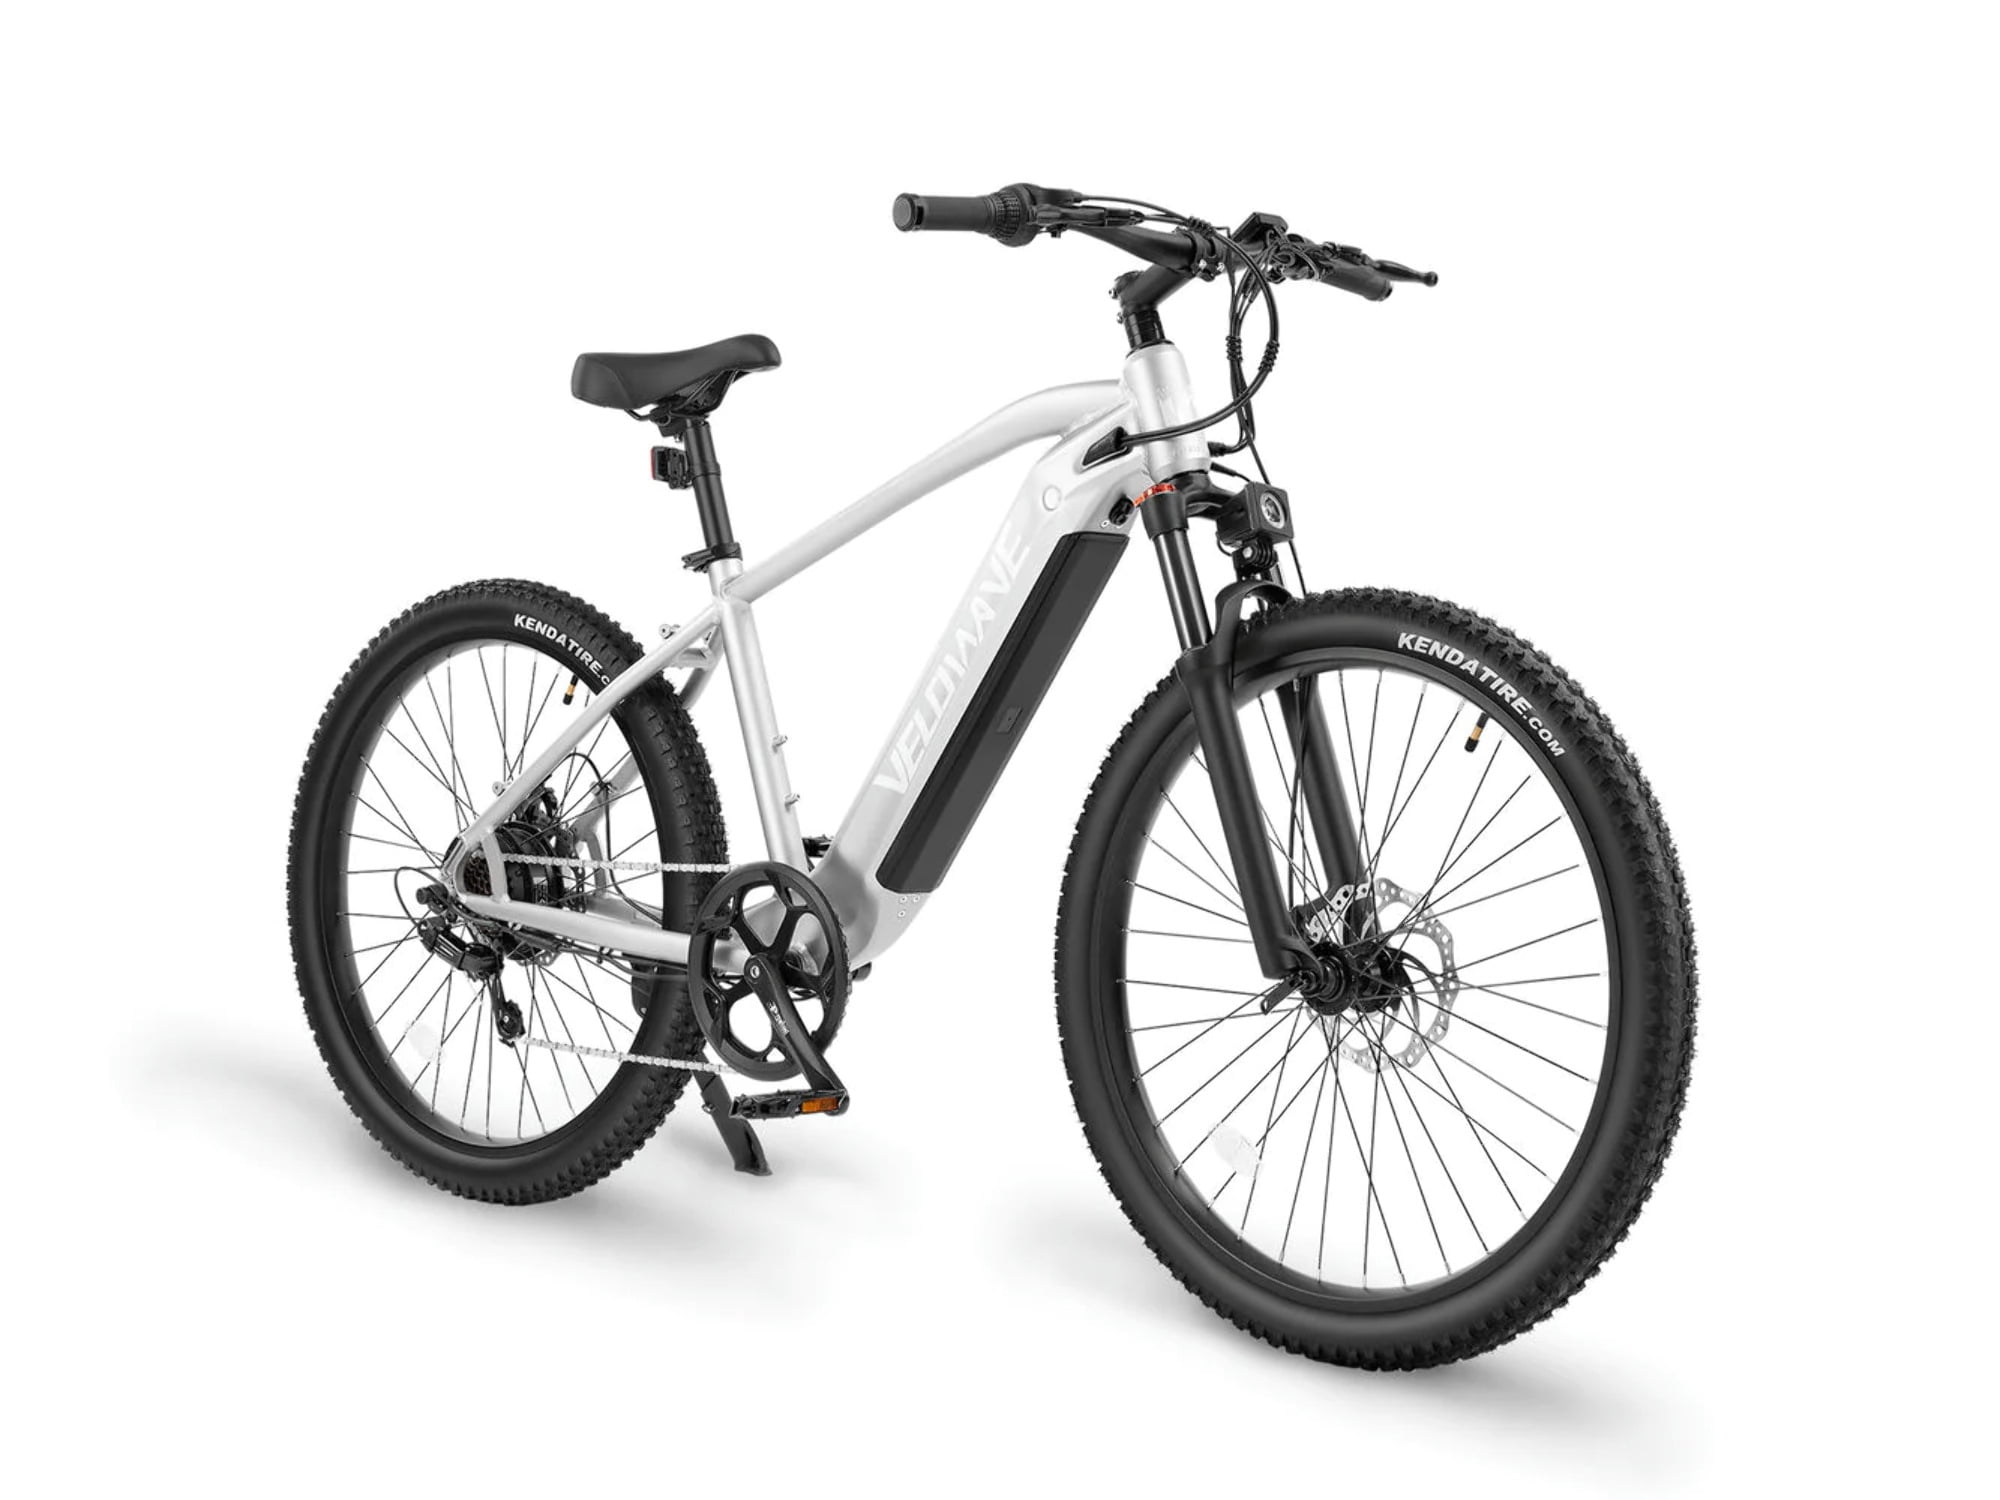 Velco offers IOT solutions for Shimano powered eBike brands